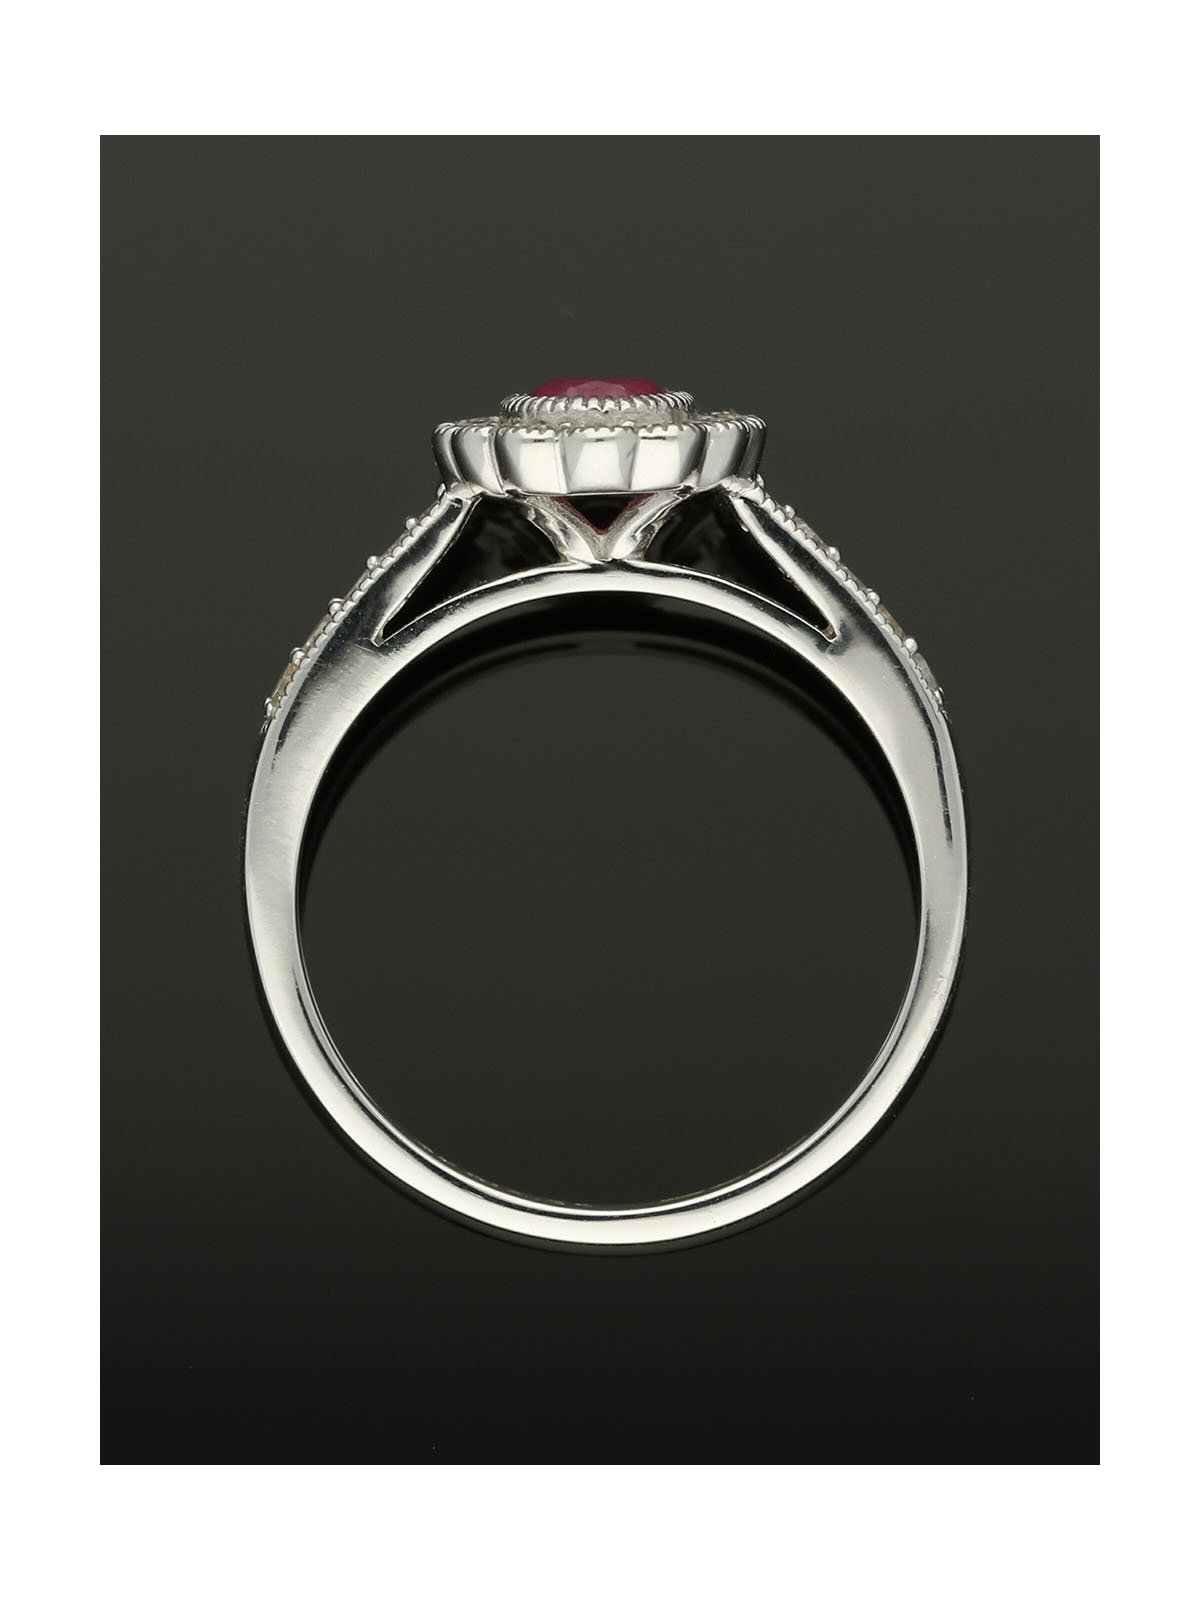 Ruby & Diamond Cluster Ring in 9ct White Gold with Diamond Shoulders